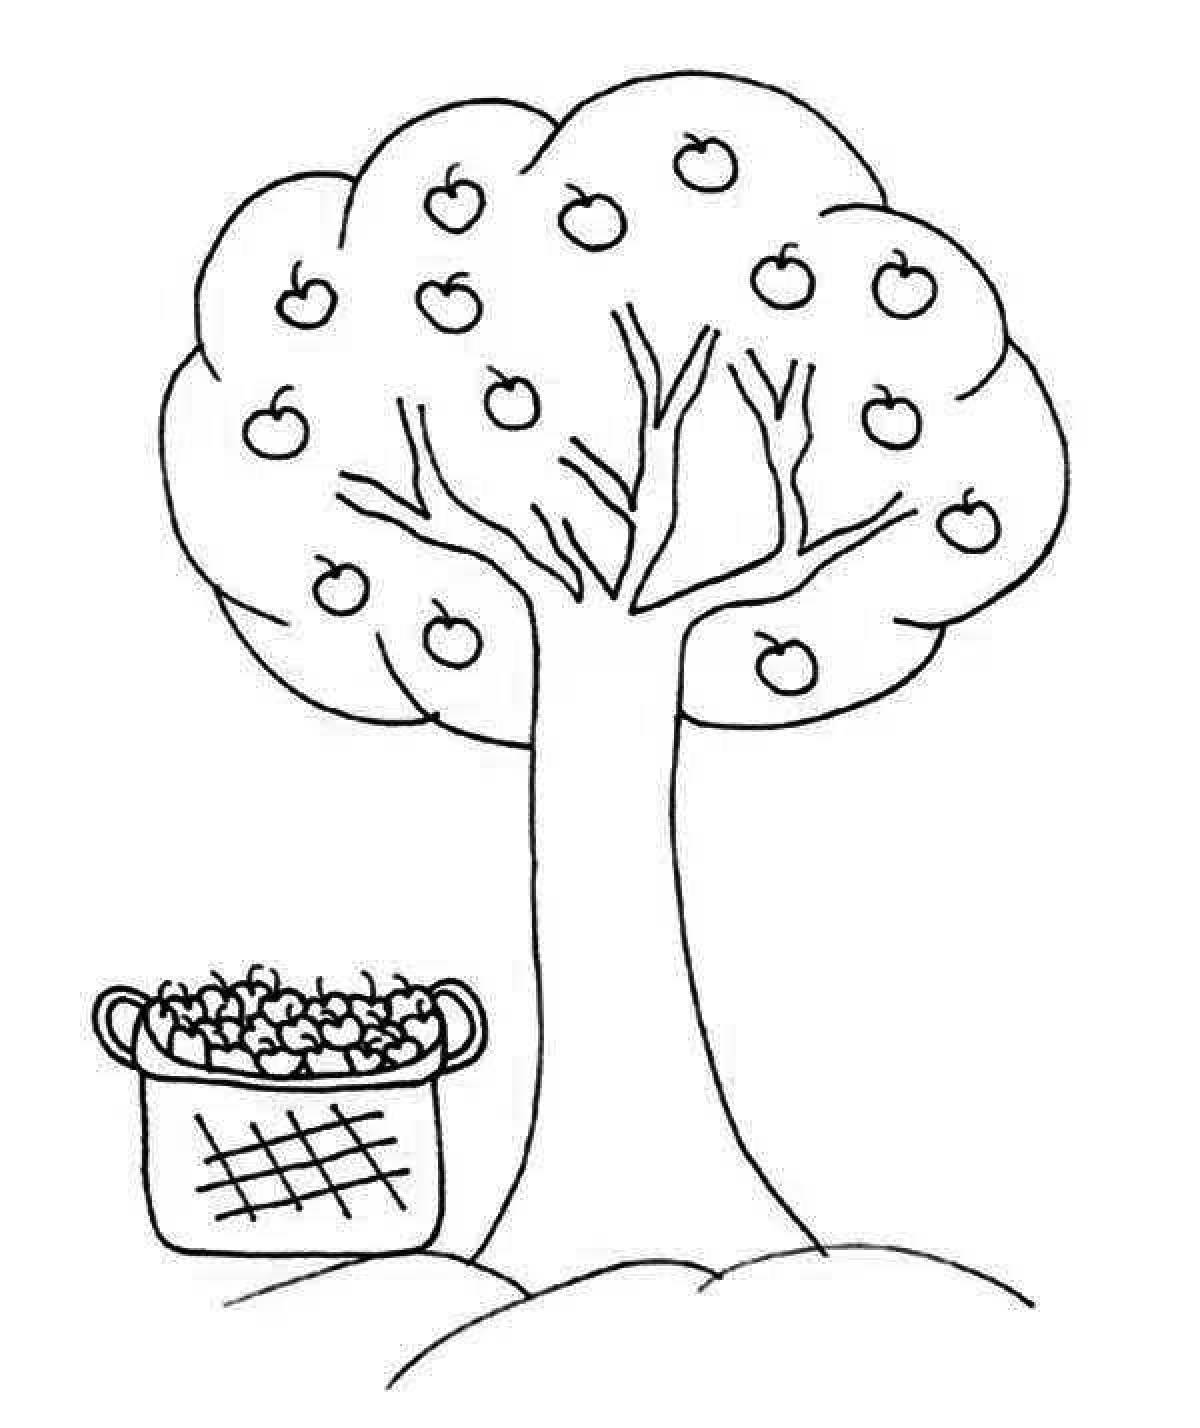 Animated coloring tree with apples